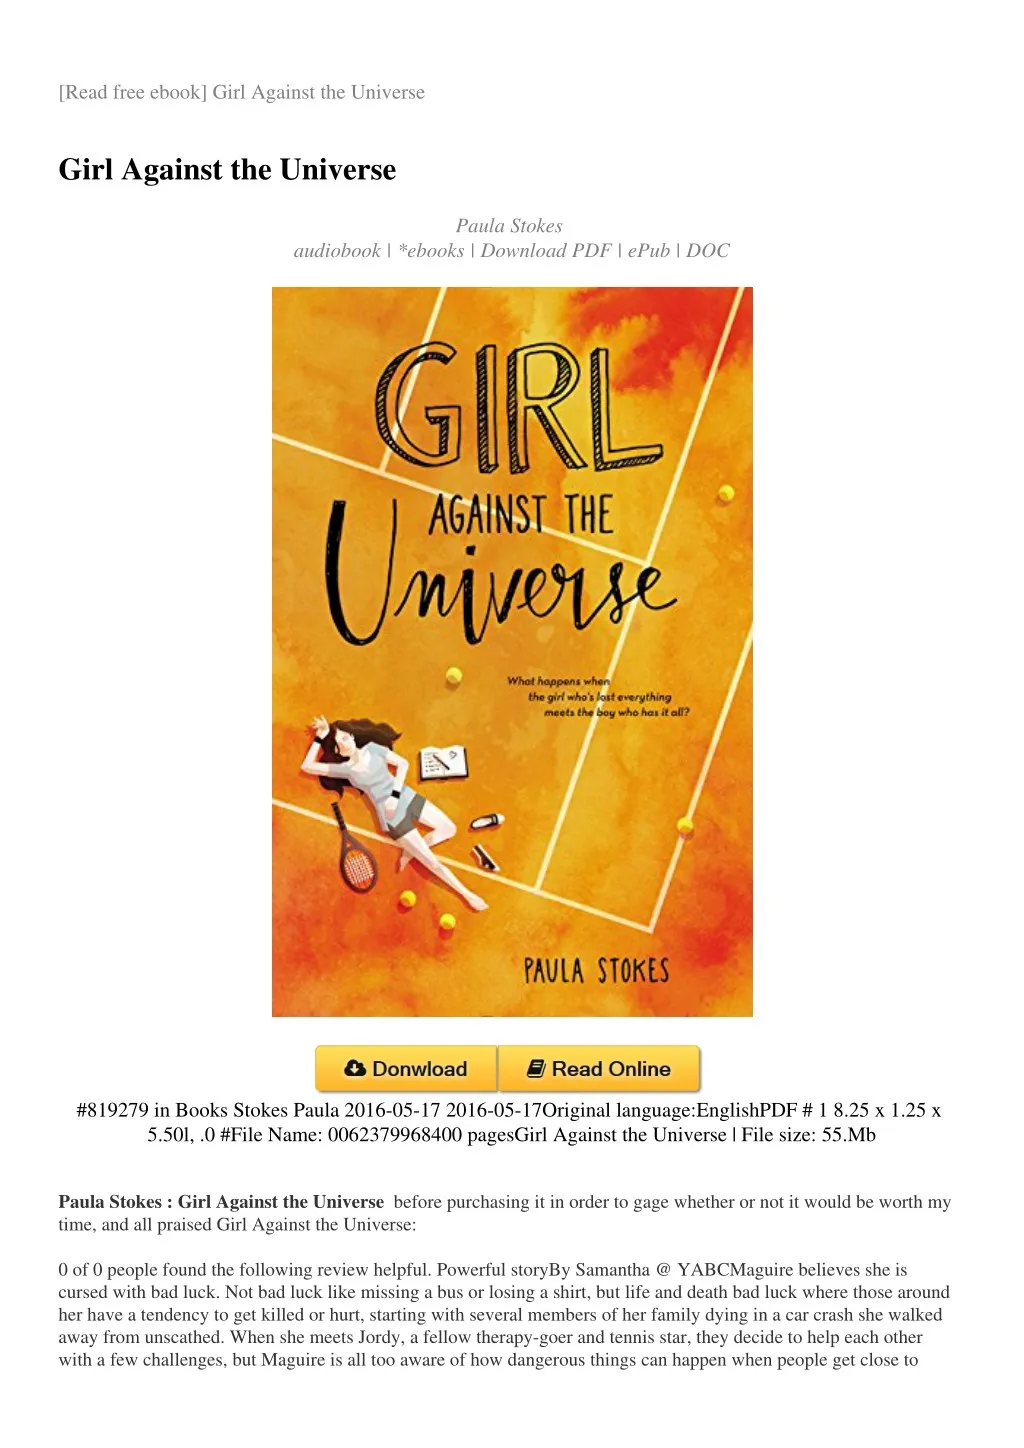 read free ebook girl against the universe